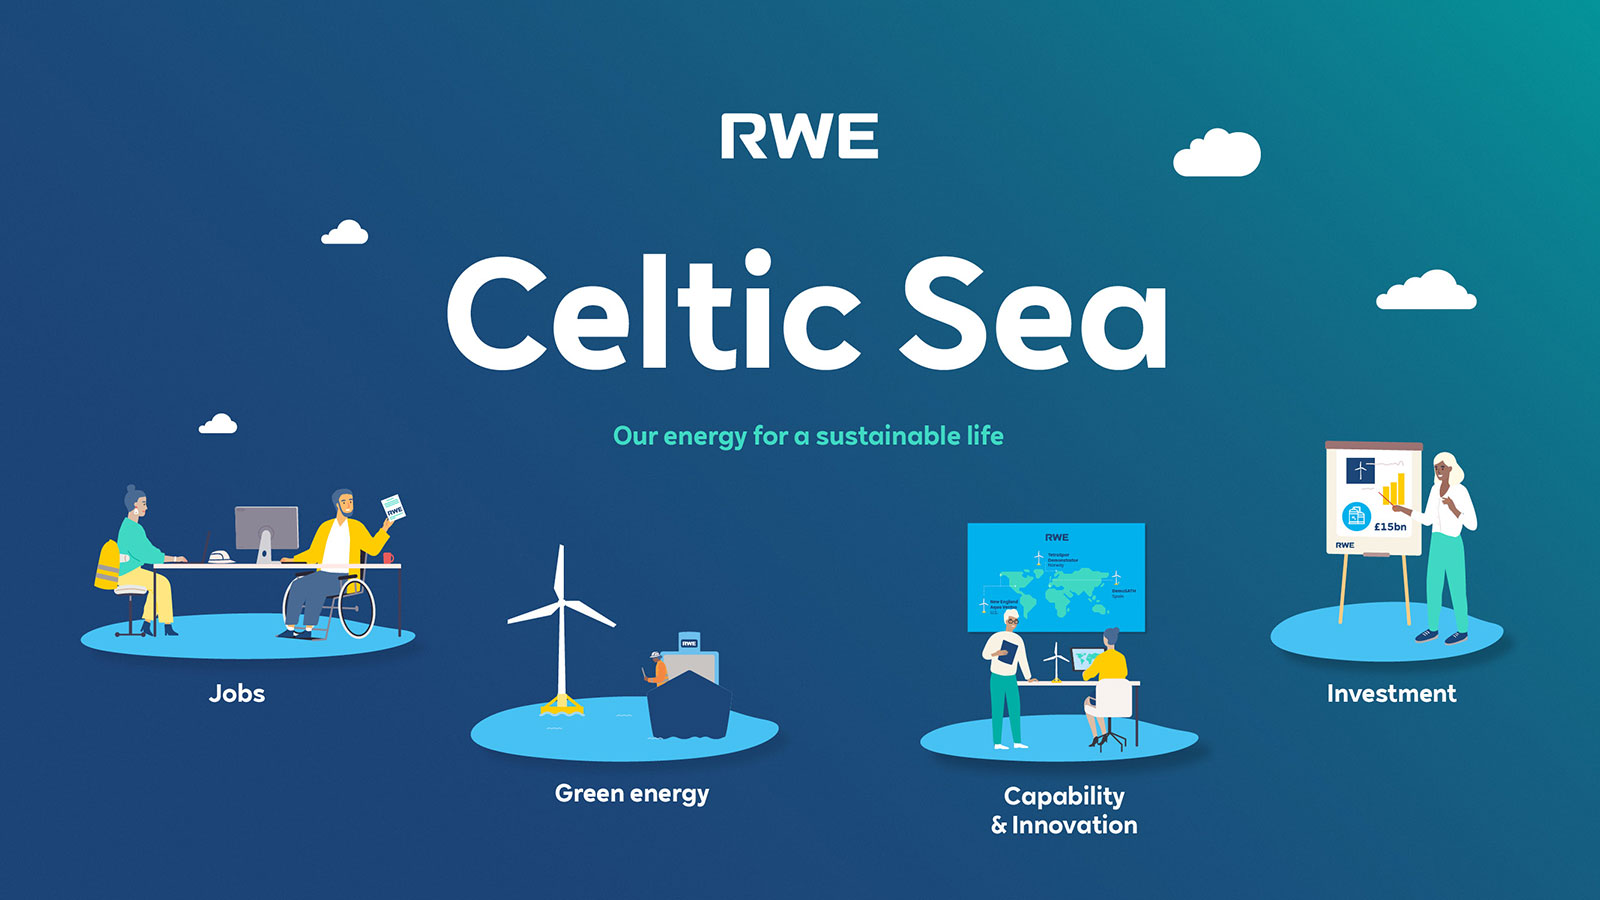 RWE in the Celtic Sea | Infographic